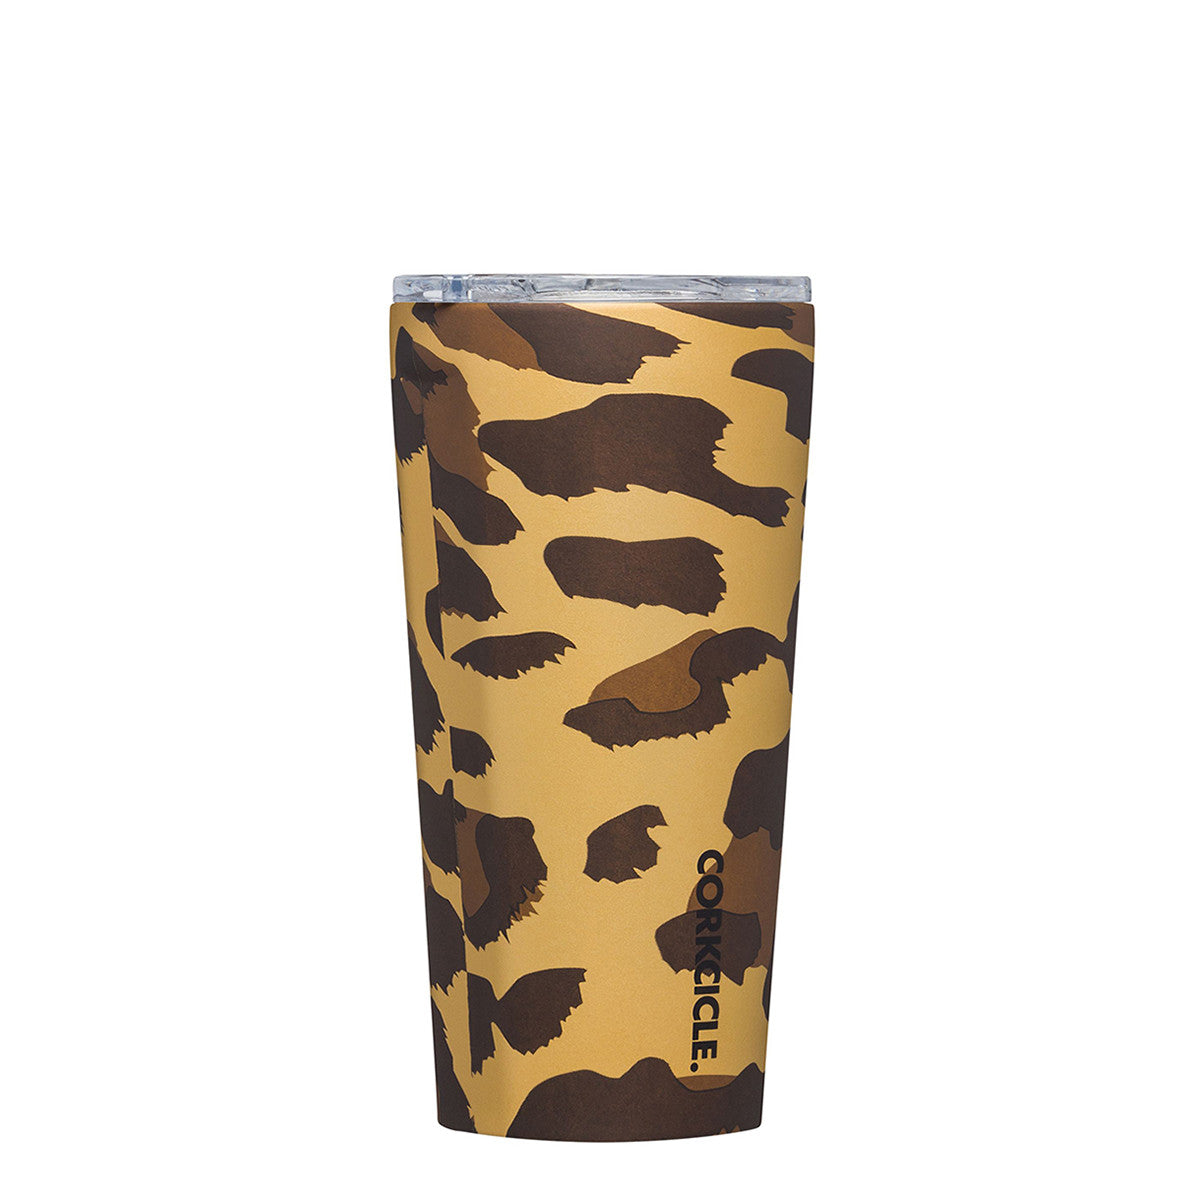 CORKCICLE Stainless Steel Insulated Luxe Tumbler 16oz (475ml) - Leopard